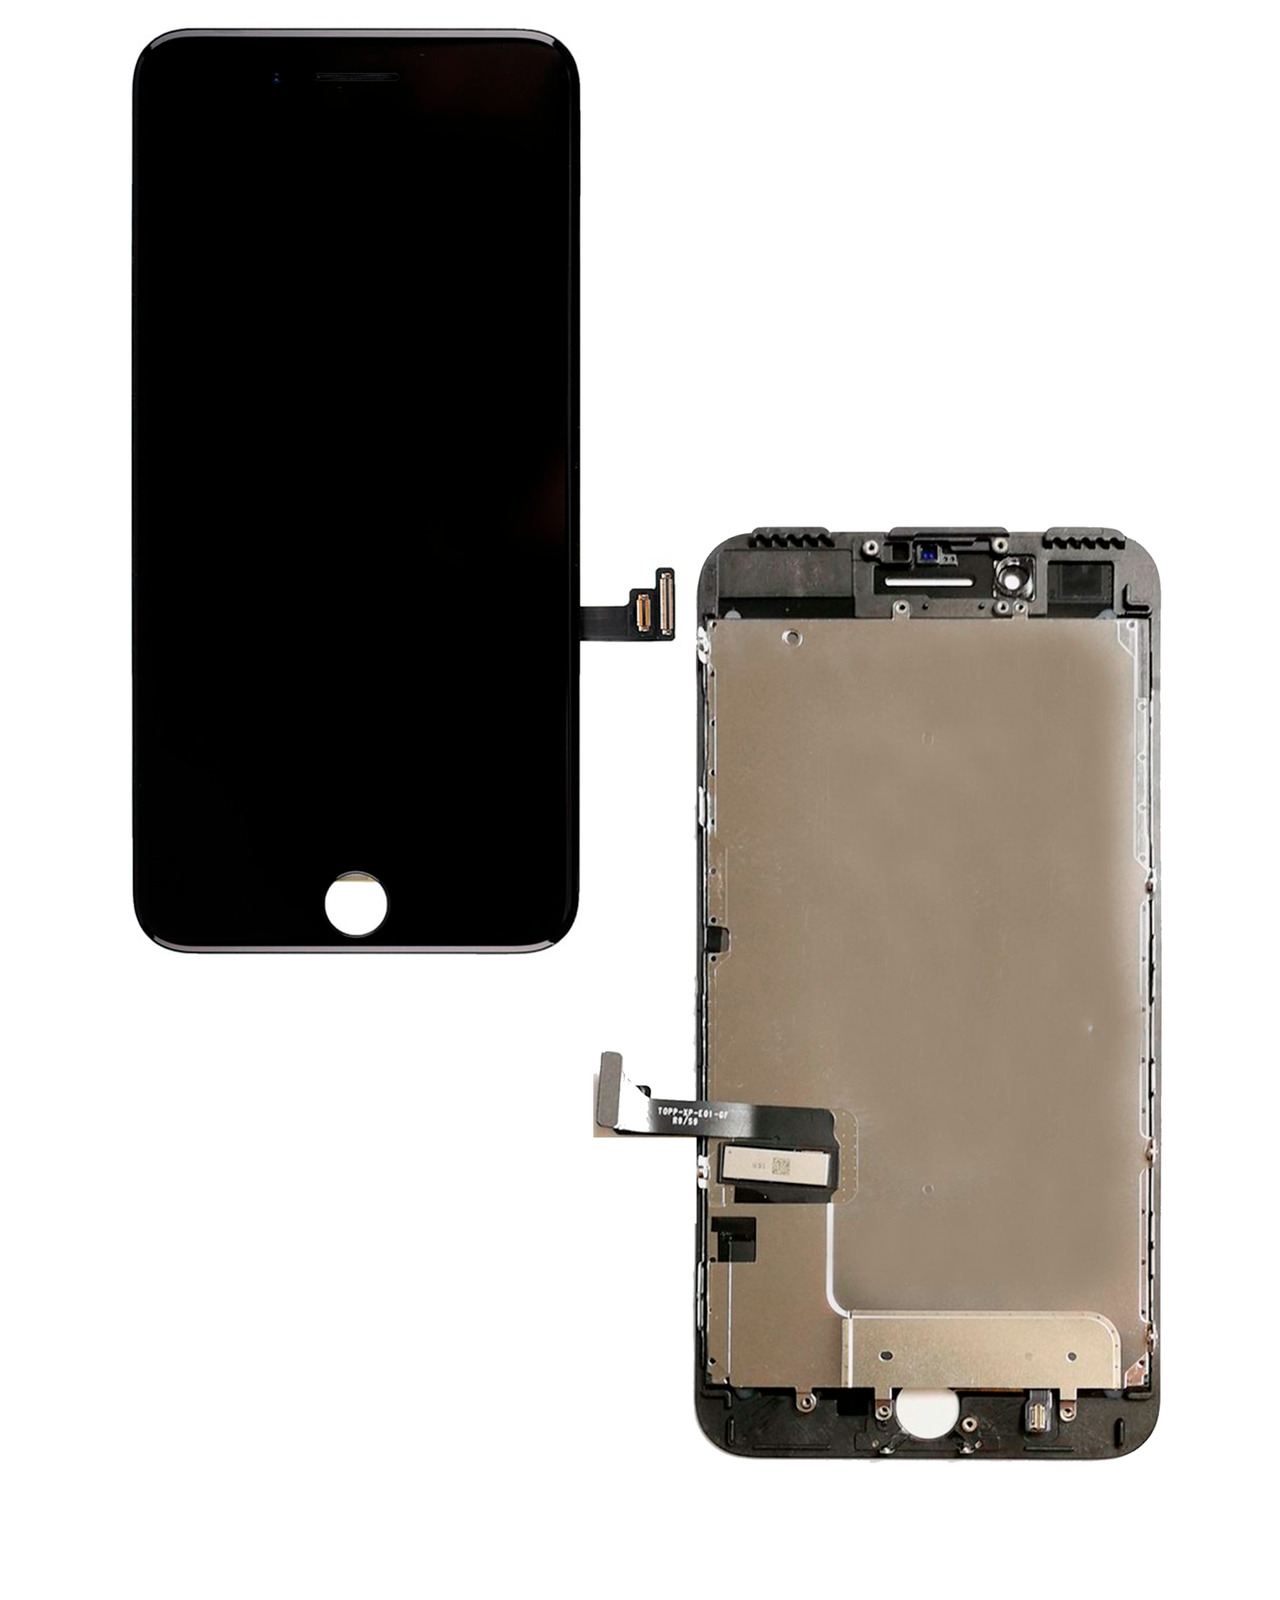 LCD Assembly With Steel Plate Compatible For iPhone 7 Plus Premium: LG Black